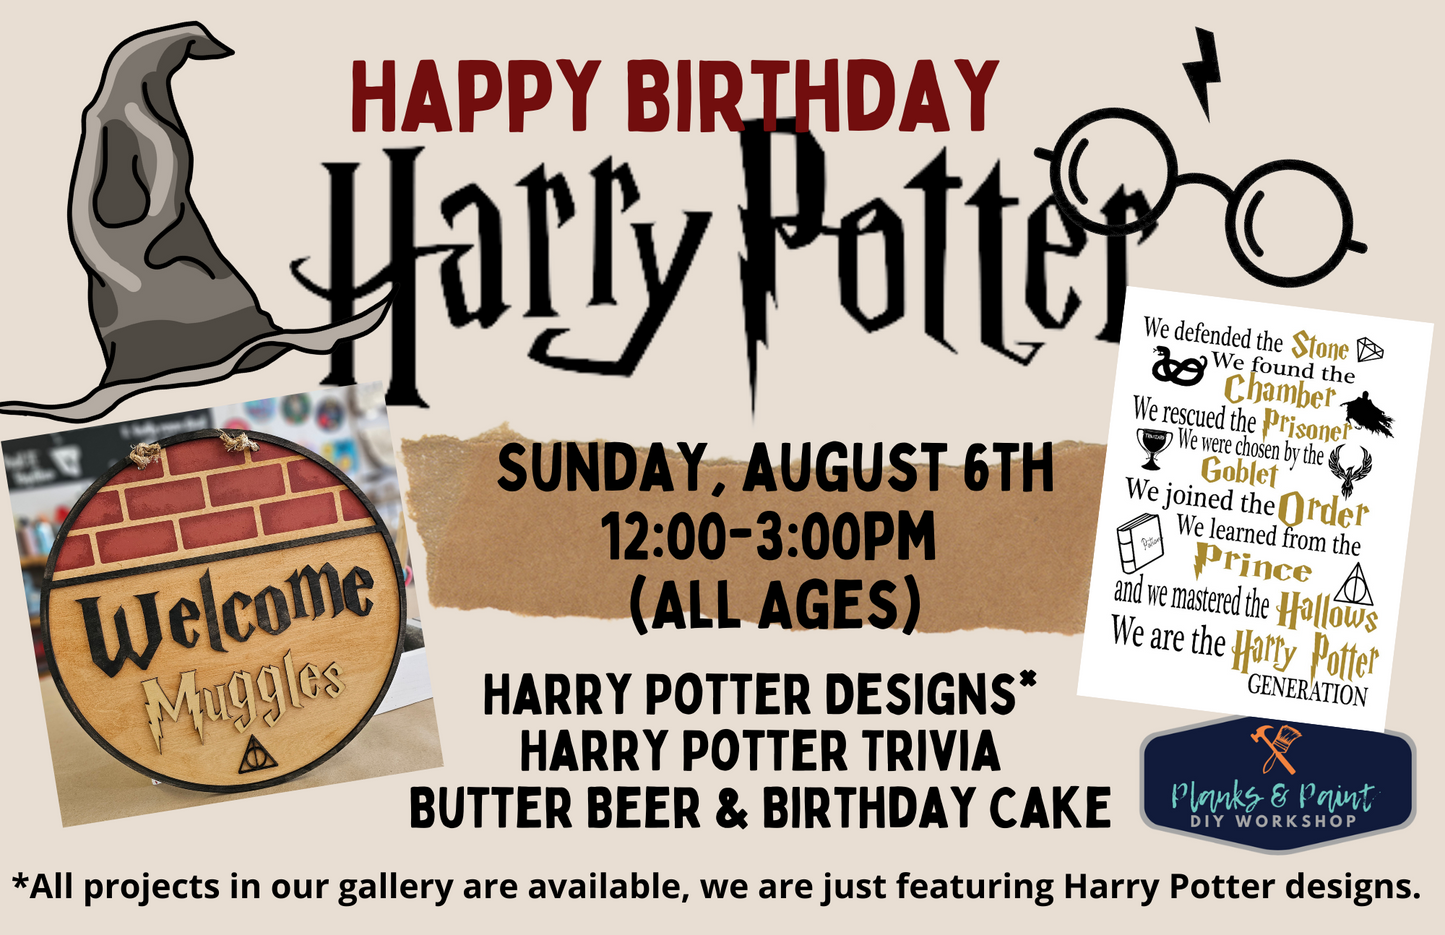 Harry Potter's Birthday Bash - August 5th @ 12pm-3pm (All Ages)